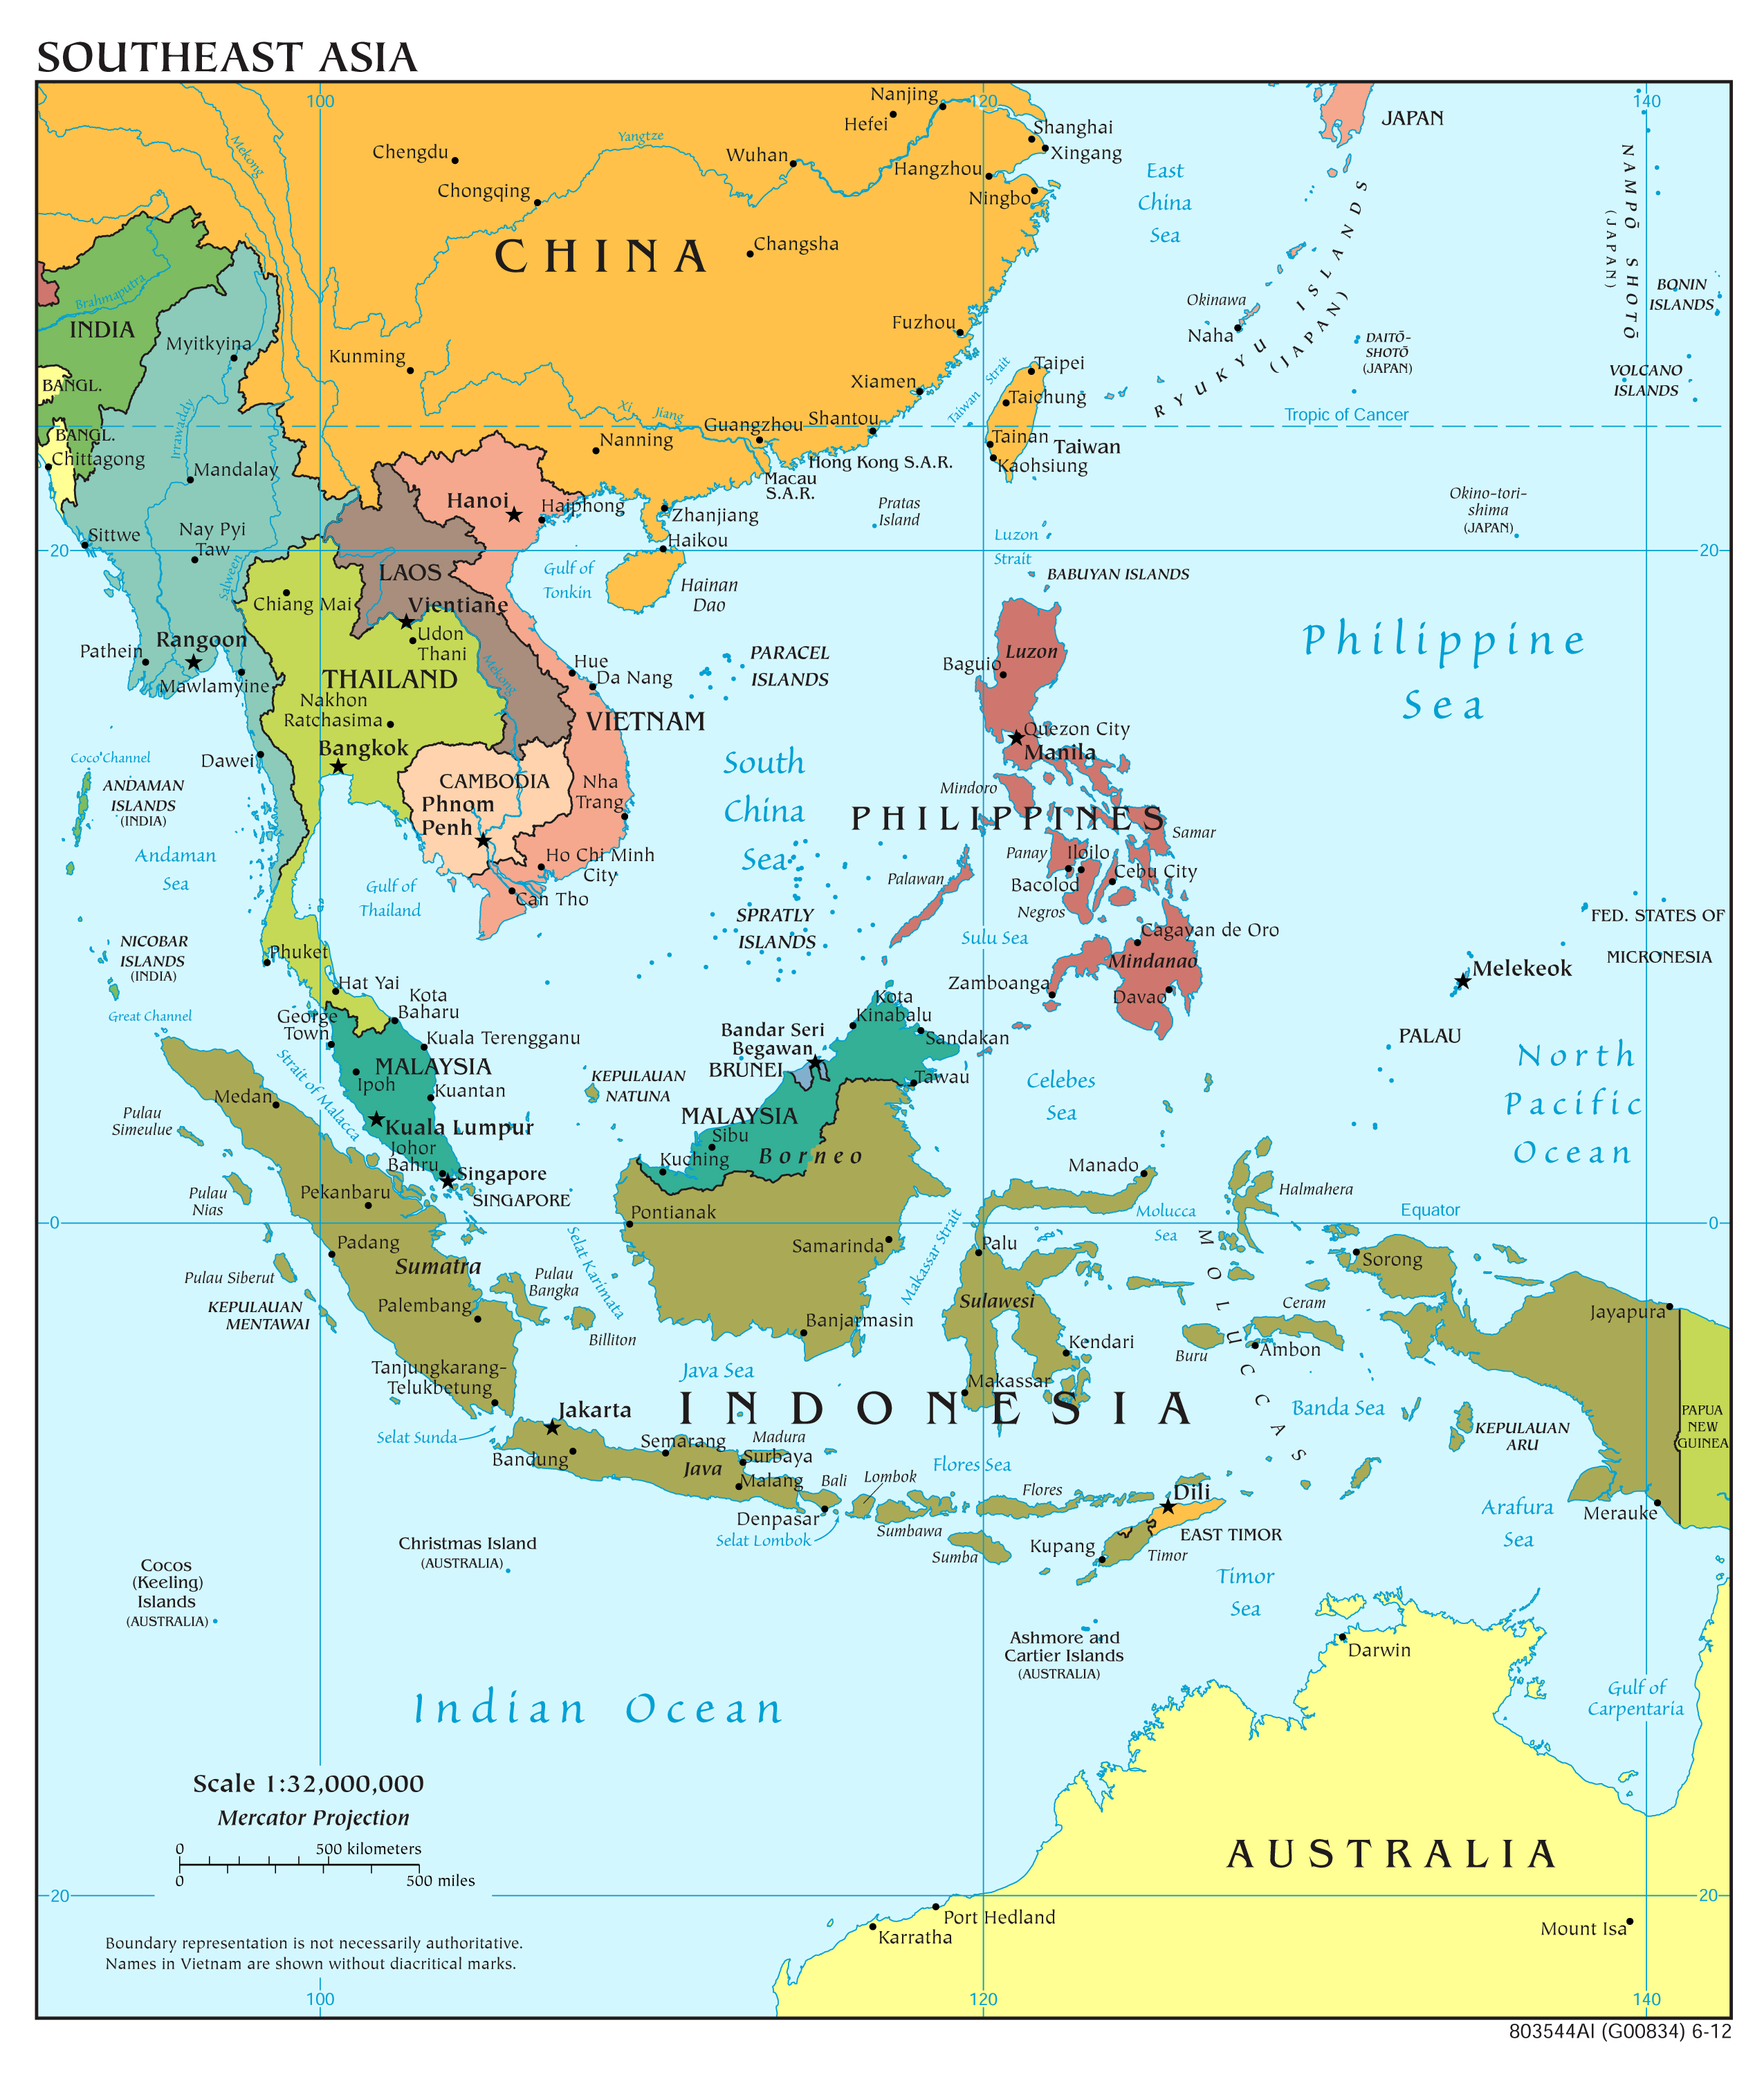 Southeast Asia Map Labeled Map Of Southeast Asia Region Maps Of Asia Regional Southeast